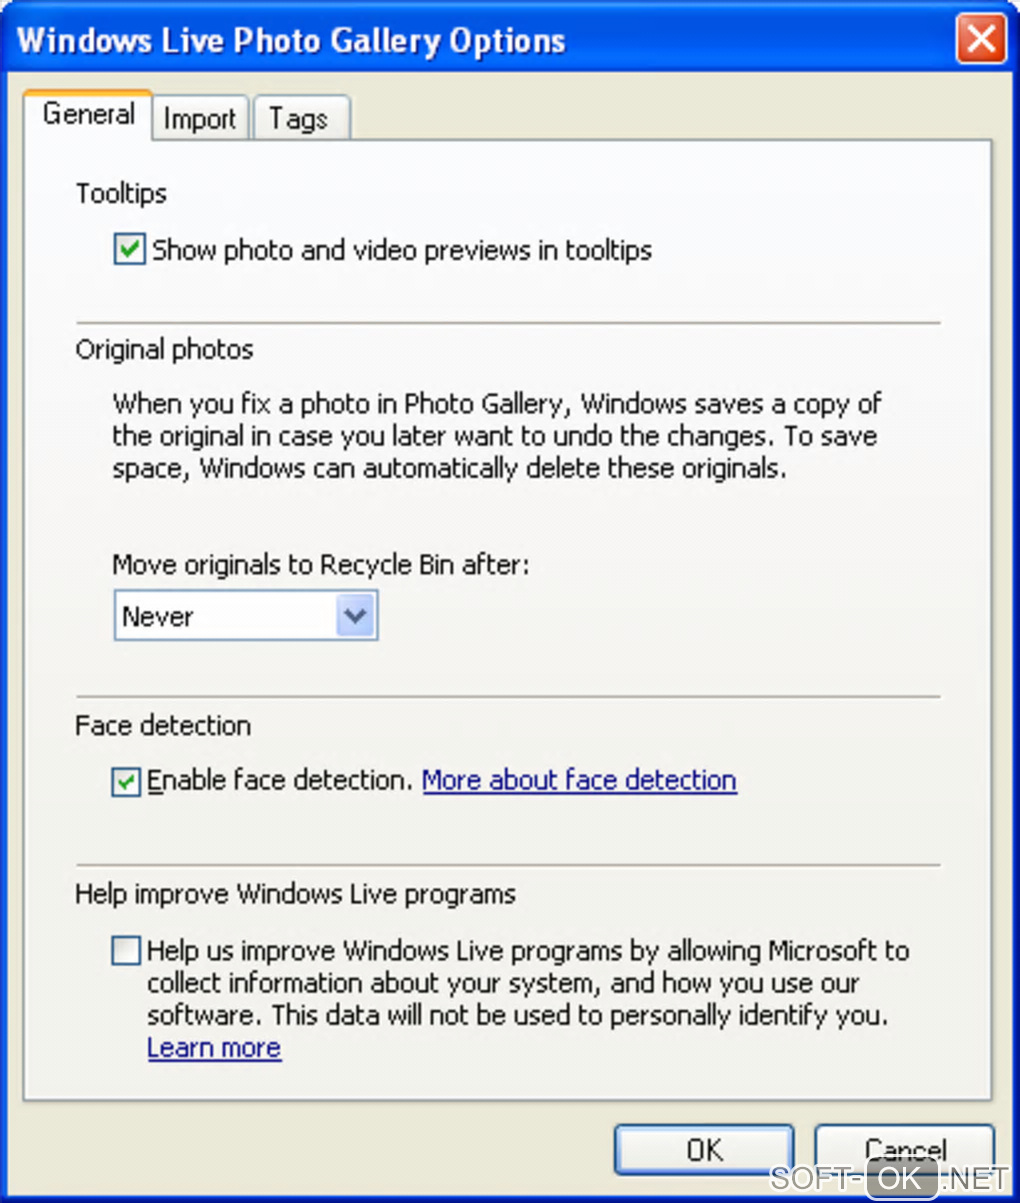 The appearance "Windows Live Photo Gallery 2012"